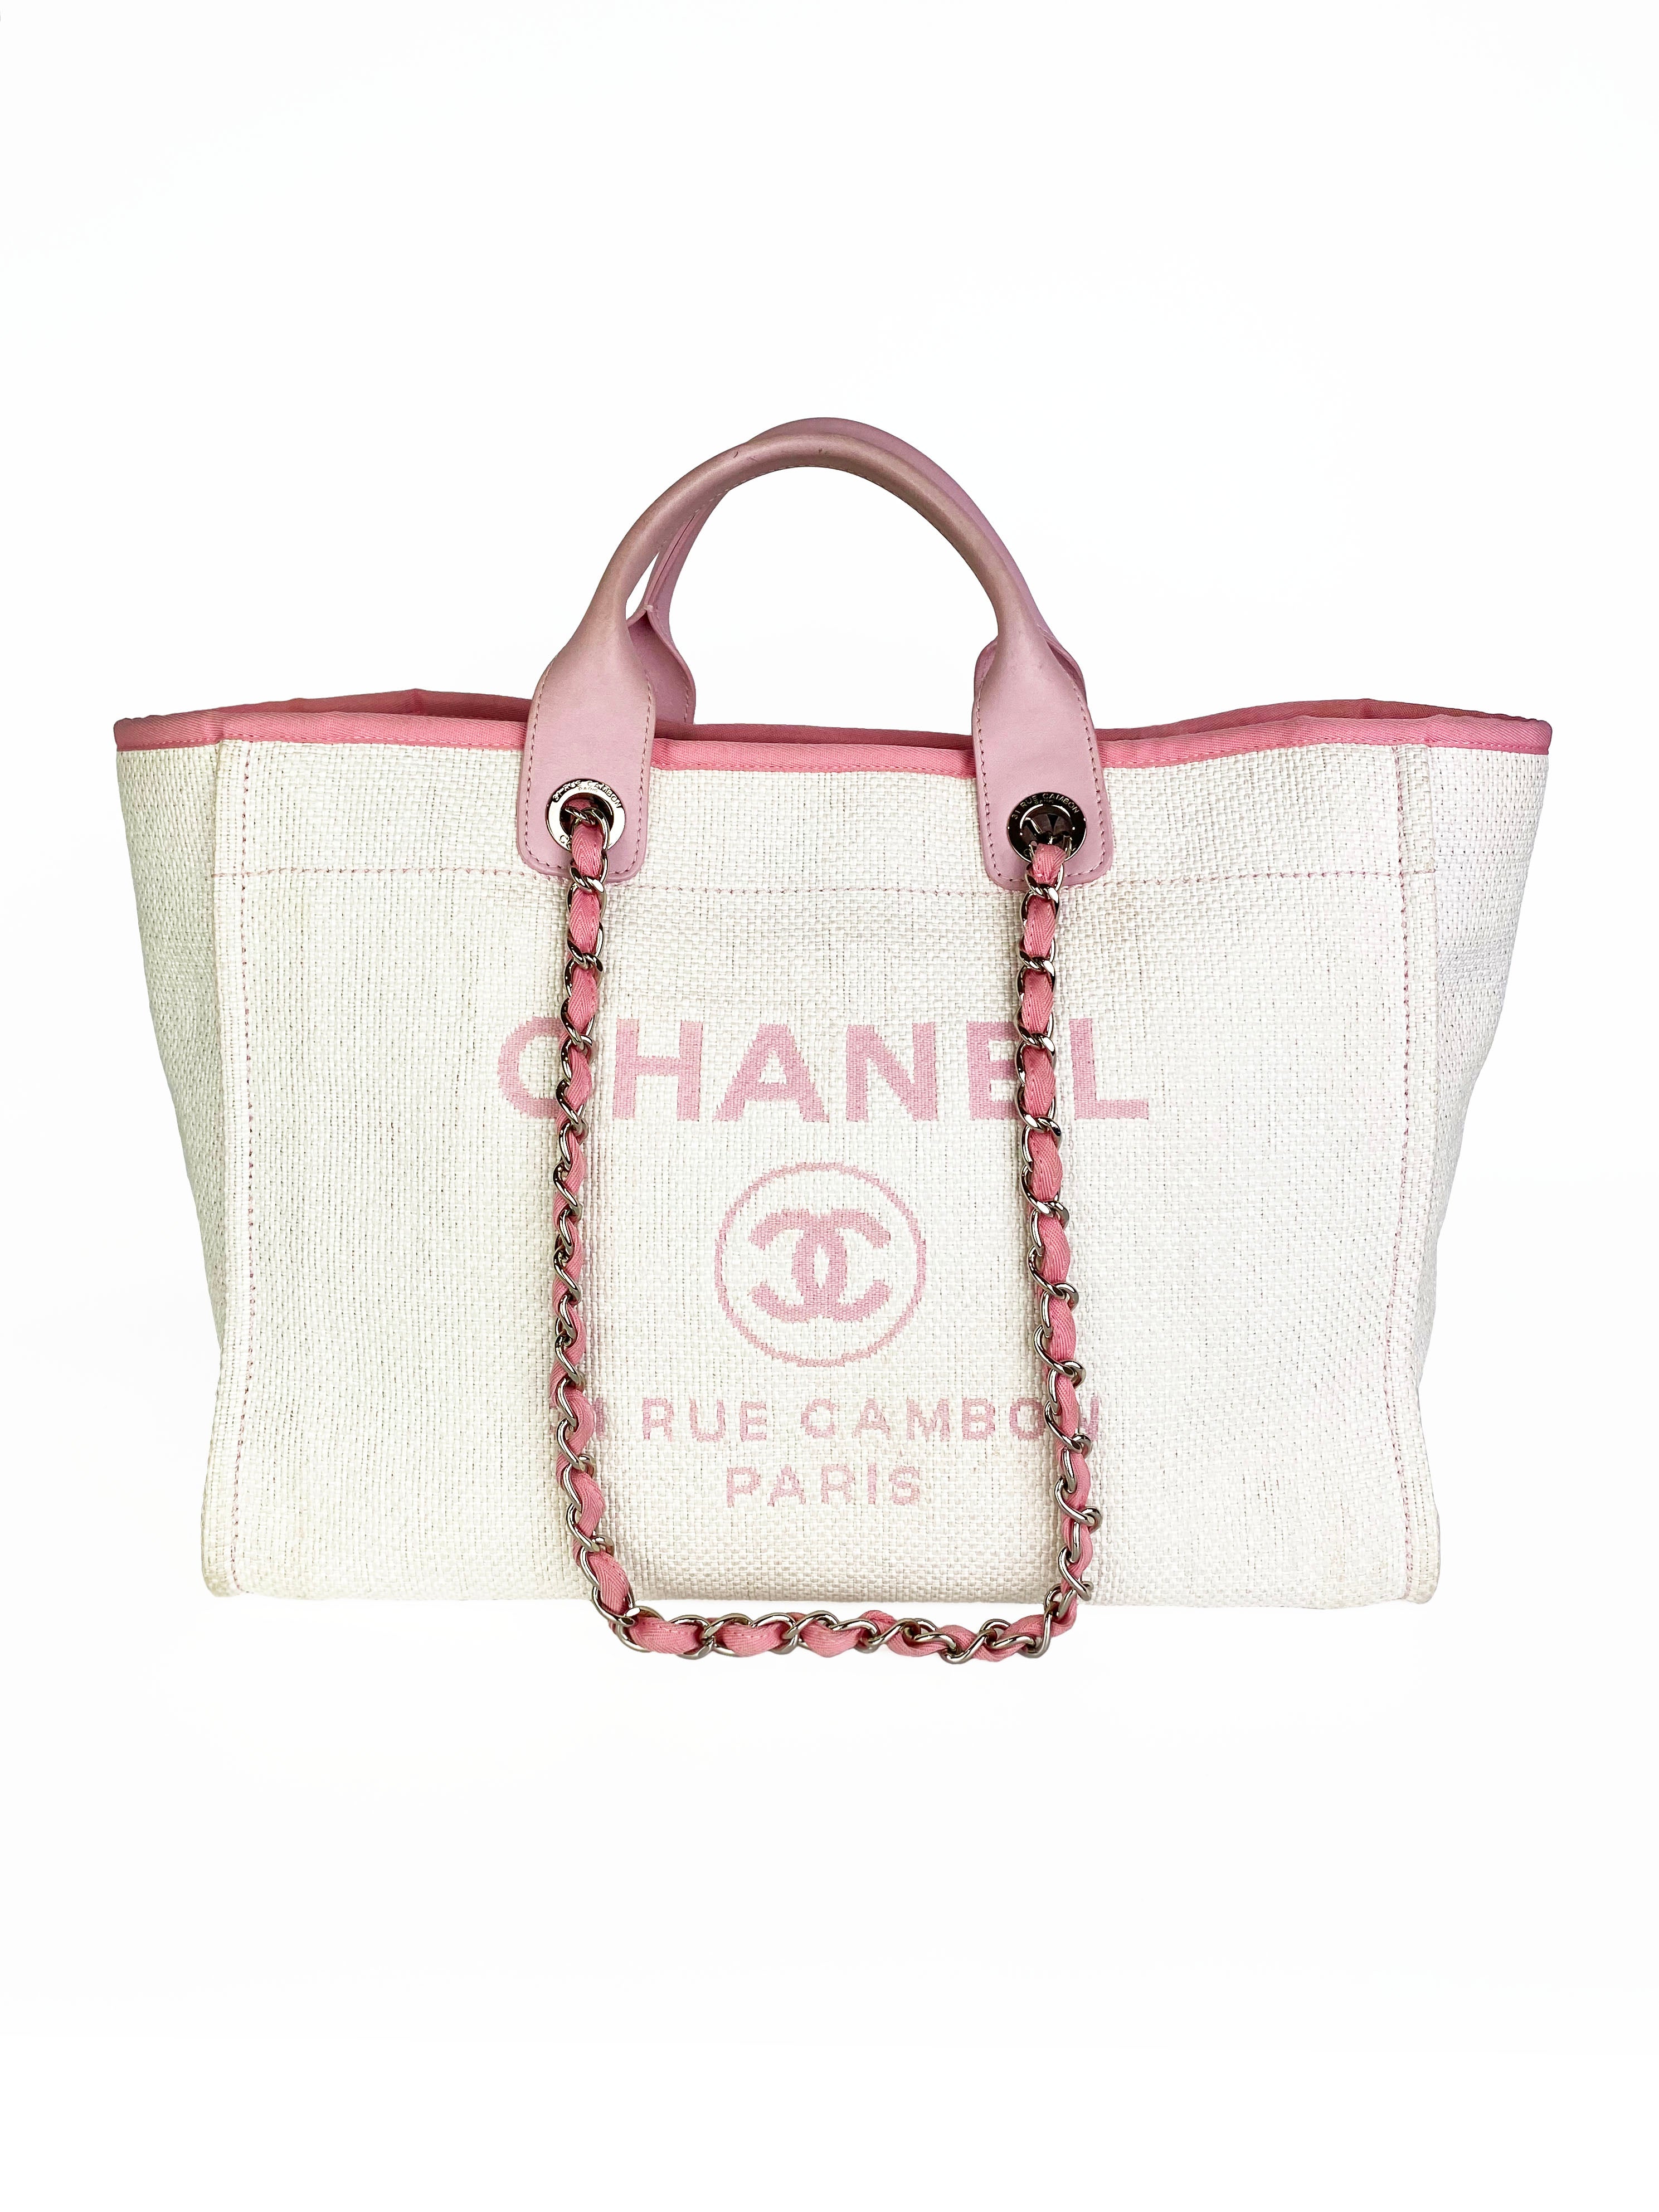 chanel-white-pink-deauville-tote-1.jpg